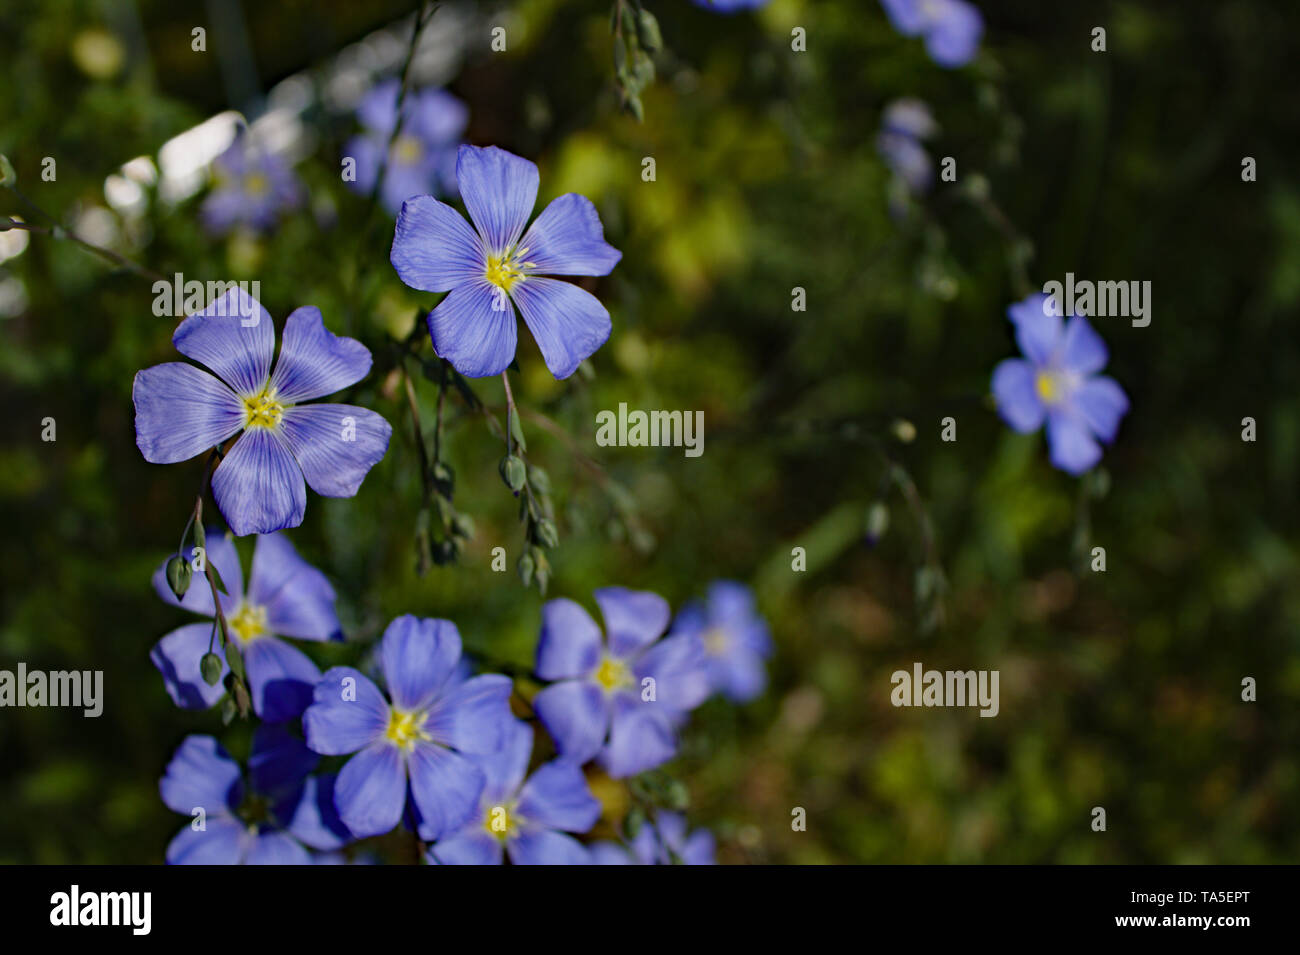 Blue Flowers in garden with blurred background Stock Photo